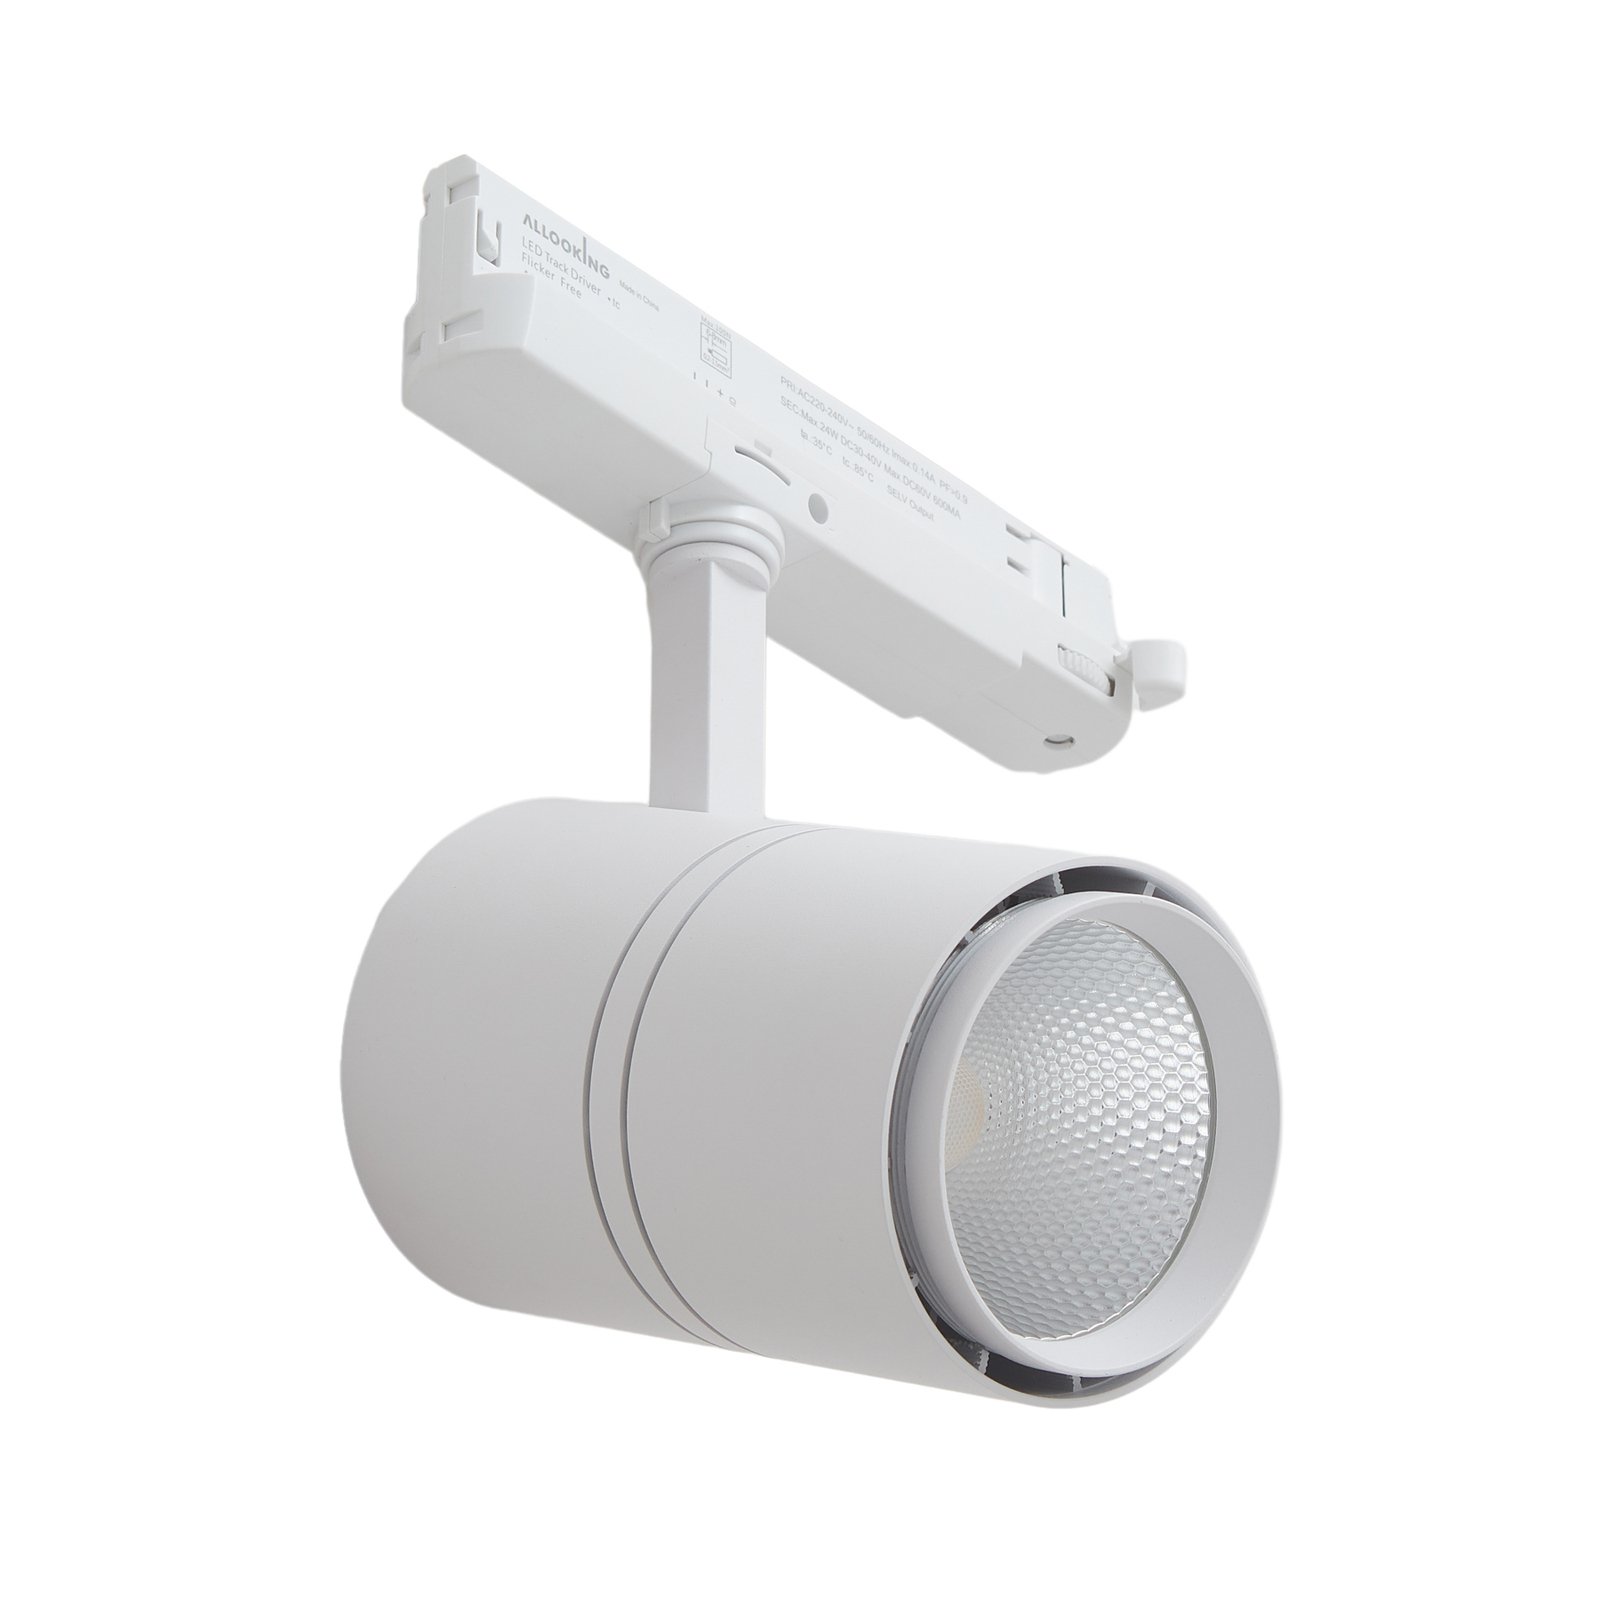 Arcchio LED track spotlight Marny, white, 3-phase, dimmable